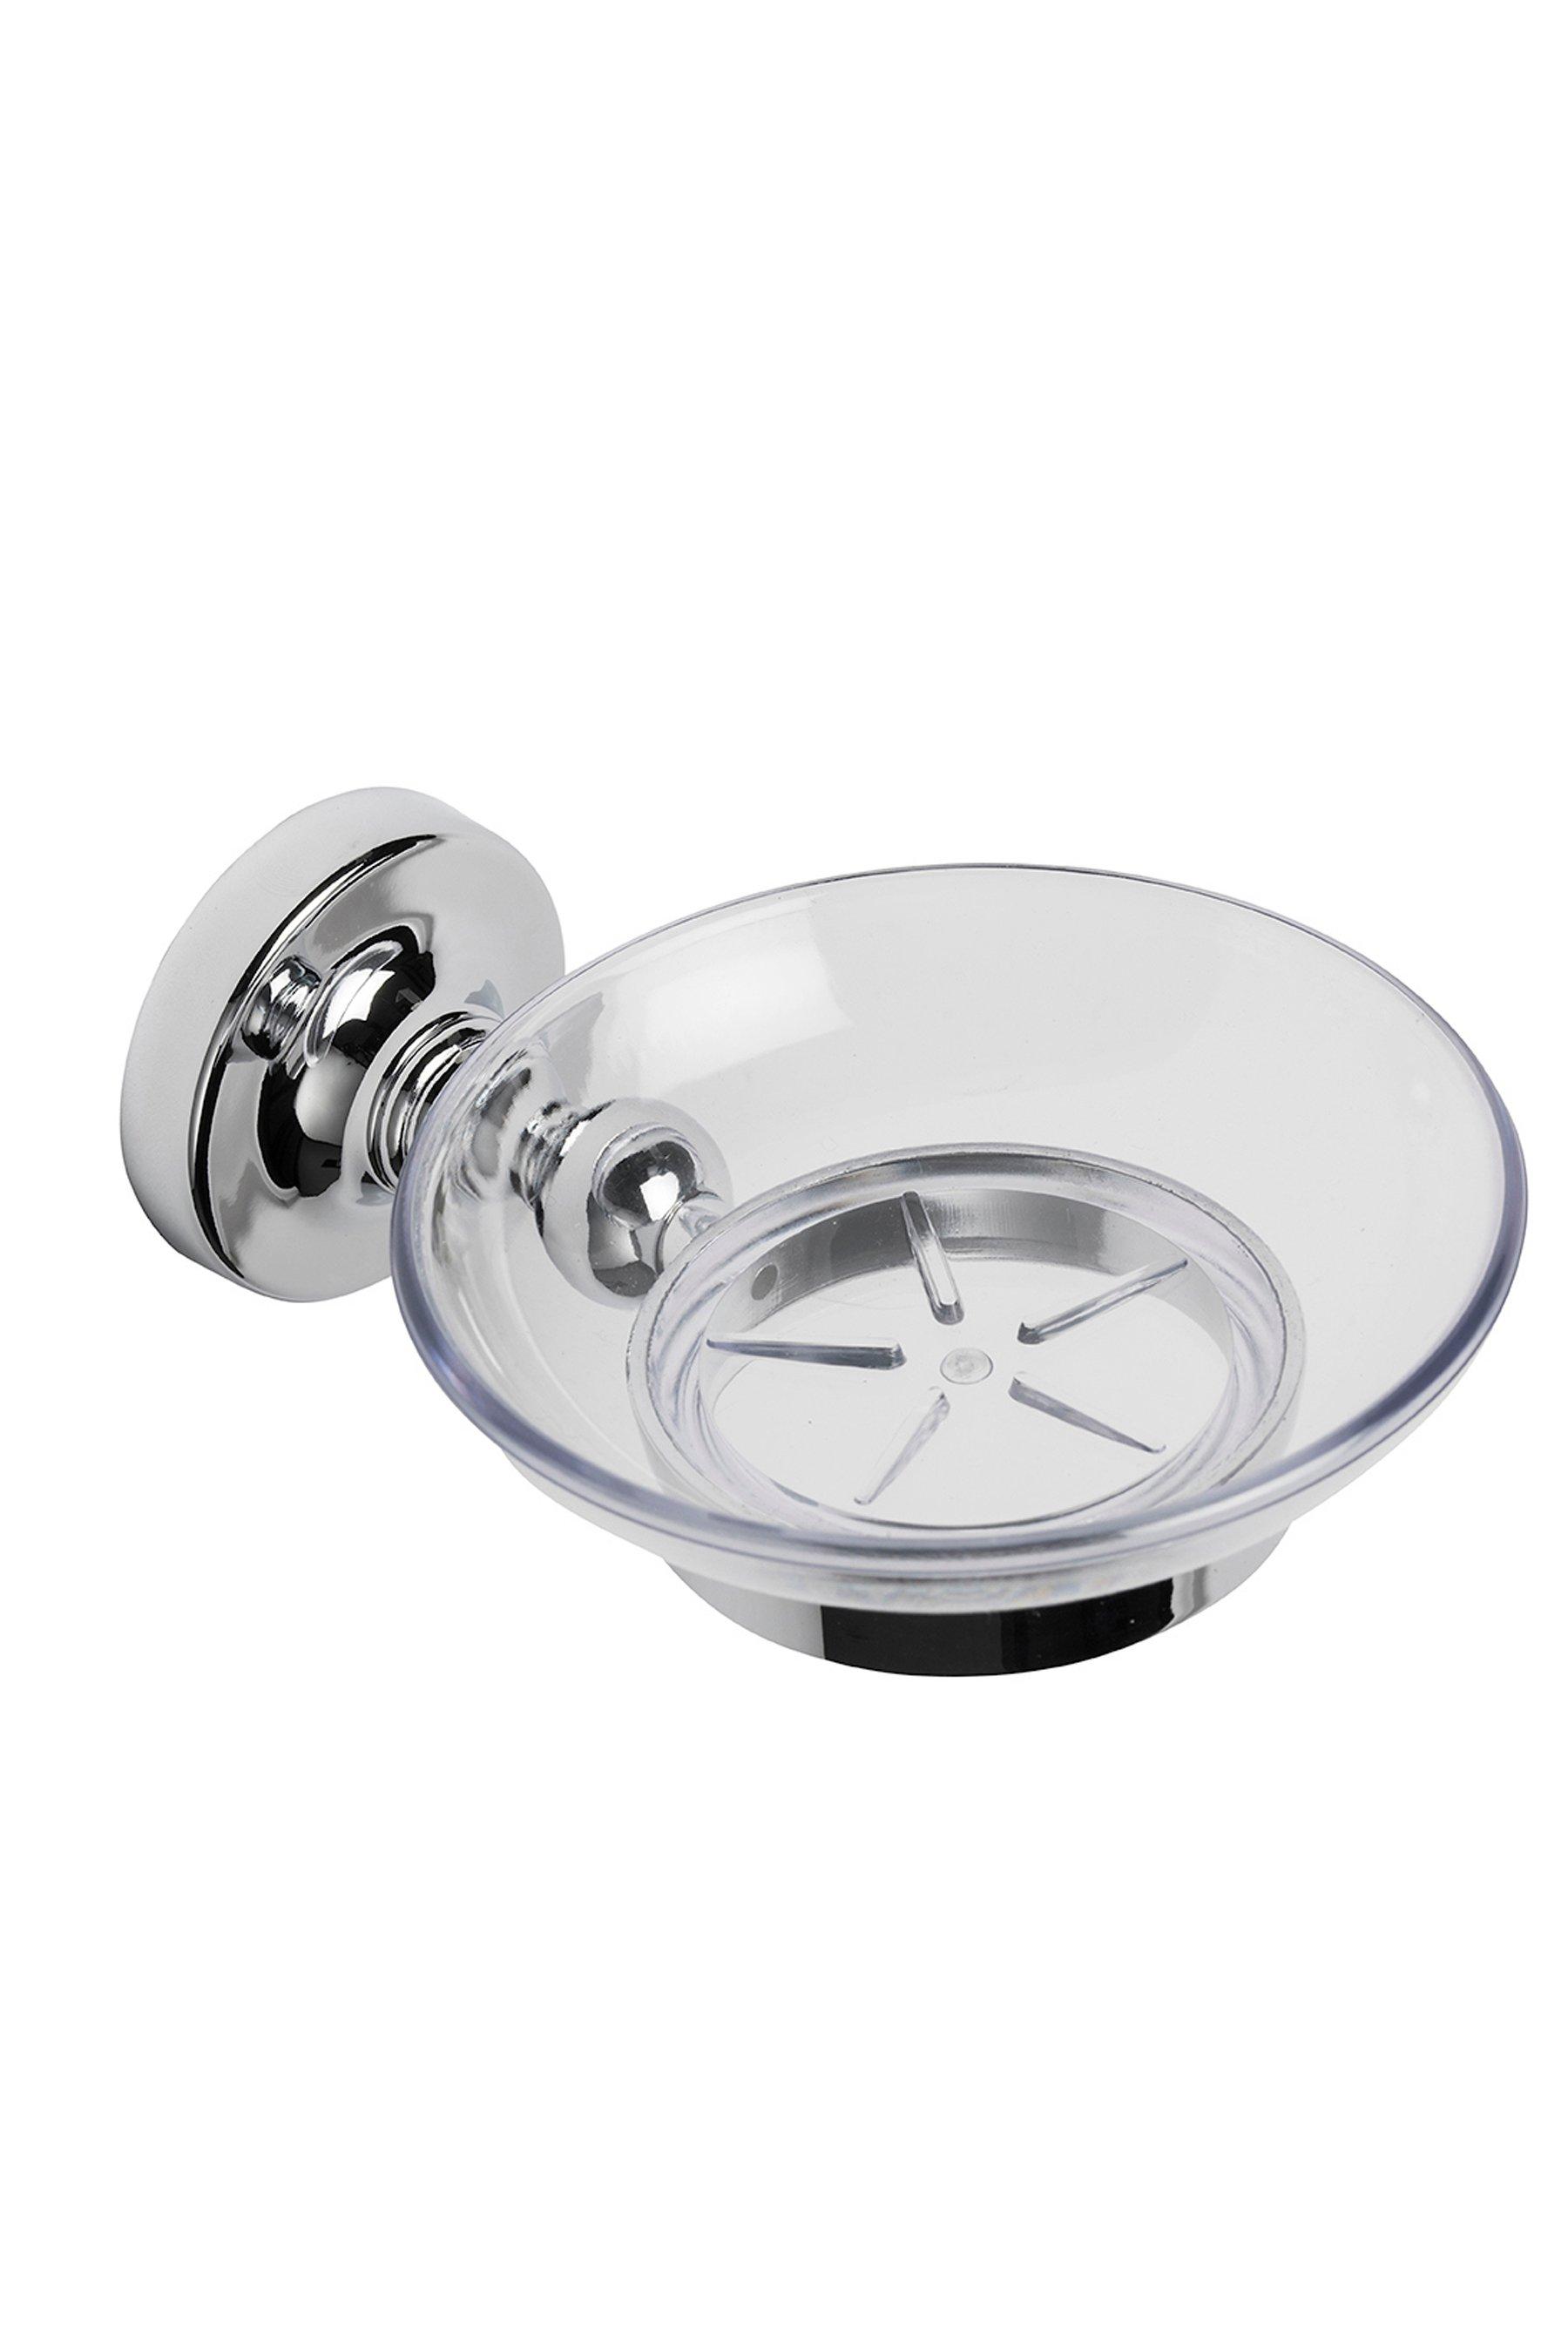 Flexi-Fix Romsey Soap Dish And Holder - Silver - Textured